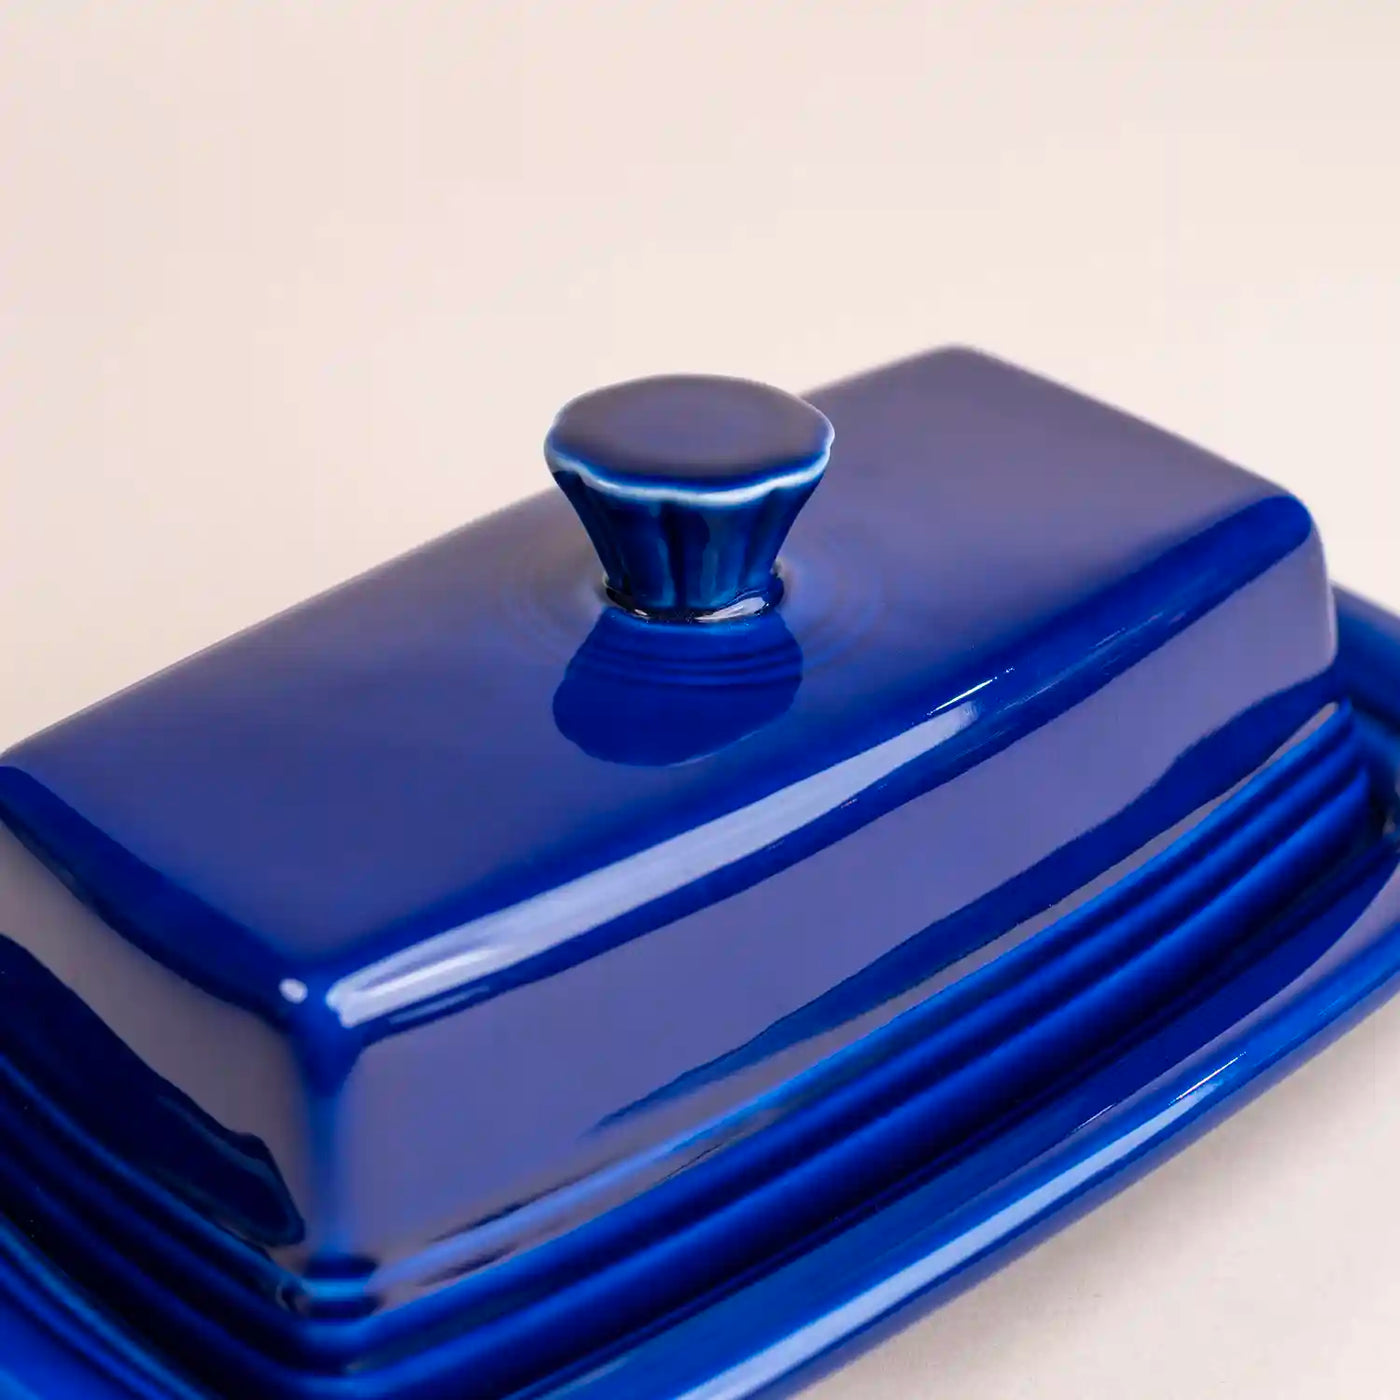 Fiesta ware twilight blue covered butter dish.